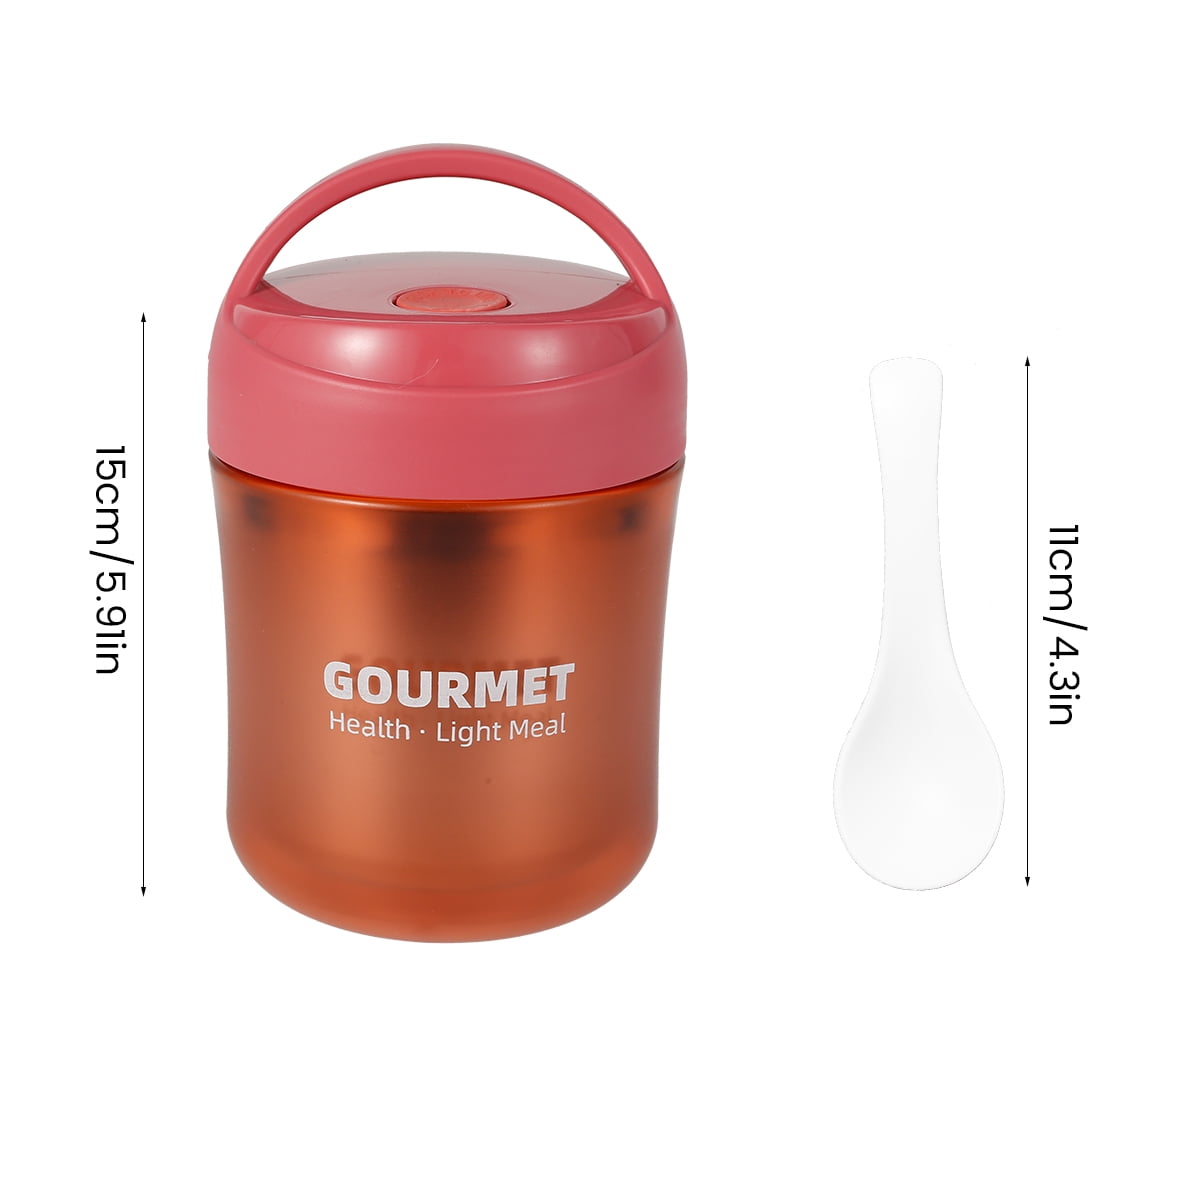  SMALLSHS Vacuum Insulated Food Jar with Foldable Spoon